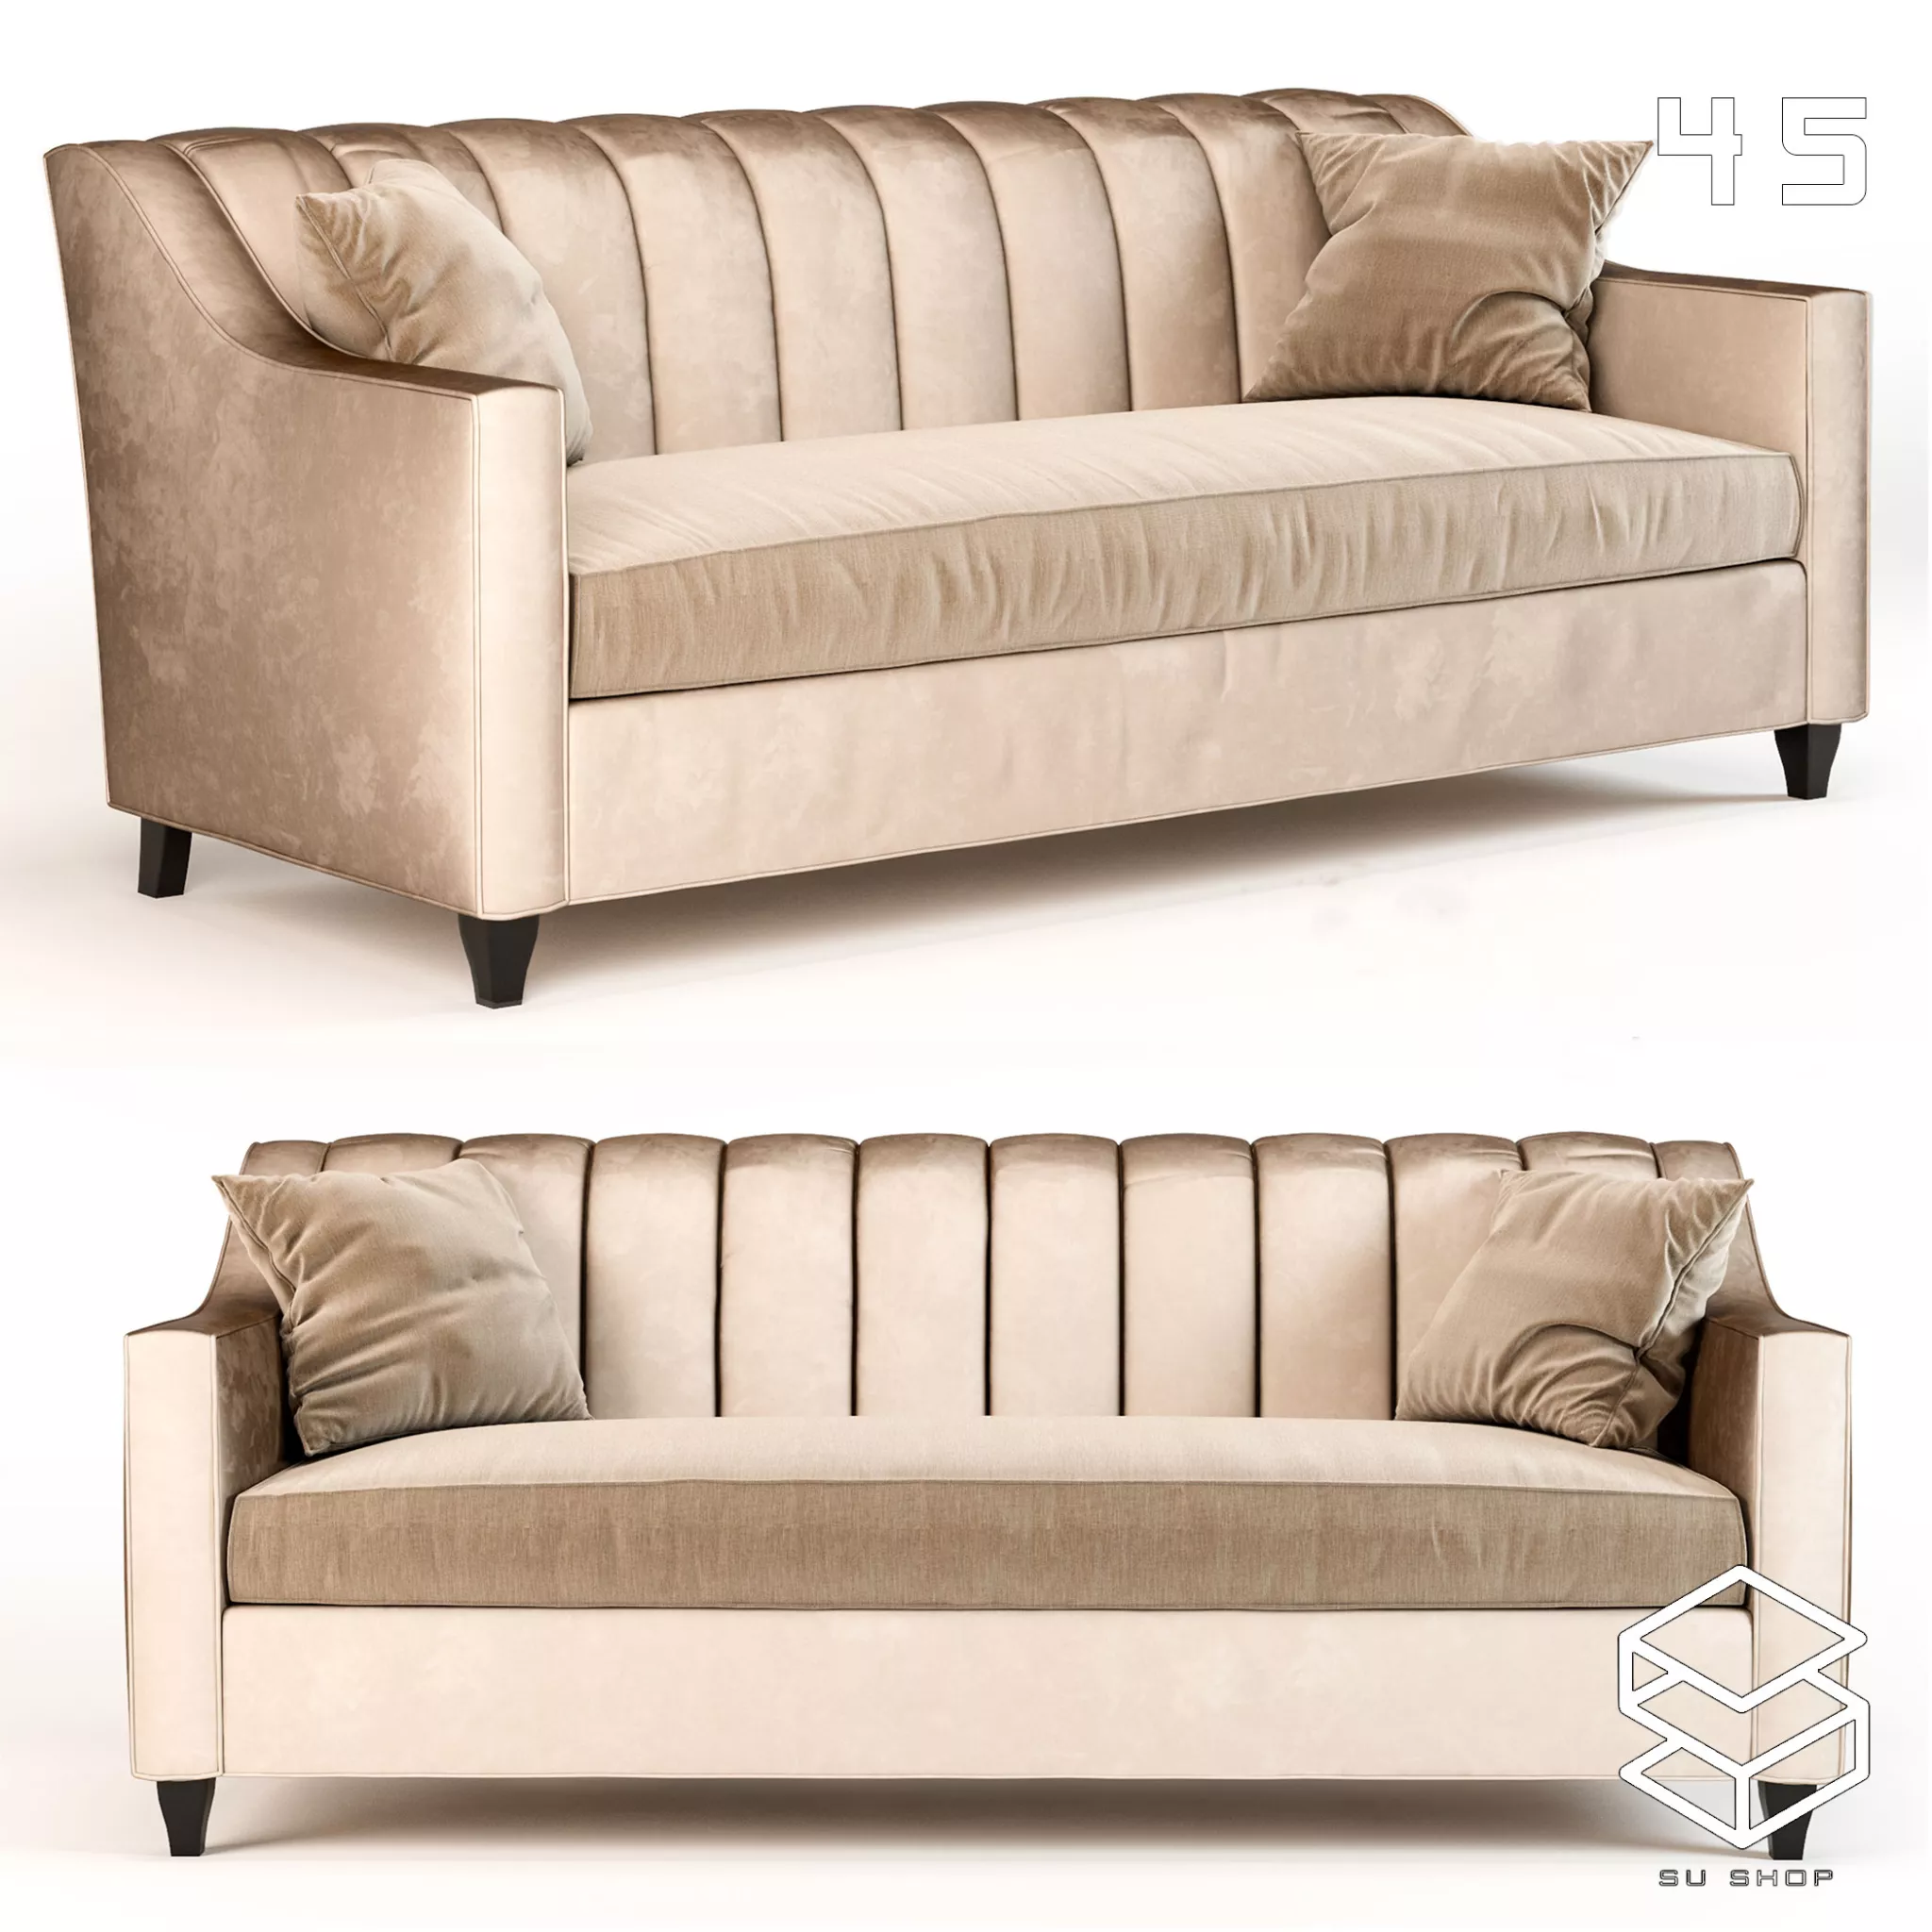 MODERN SOFA - SKETCHUP 3D MODEL - VRAY OR ENSCAPE - ID13669